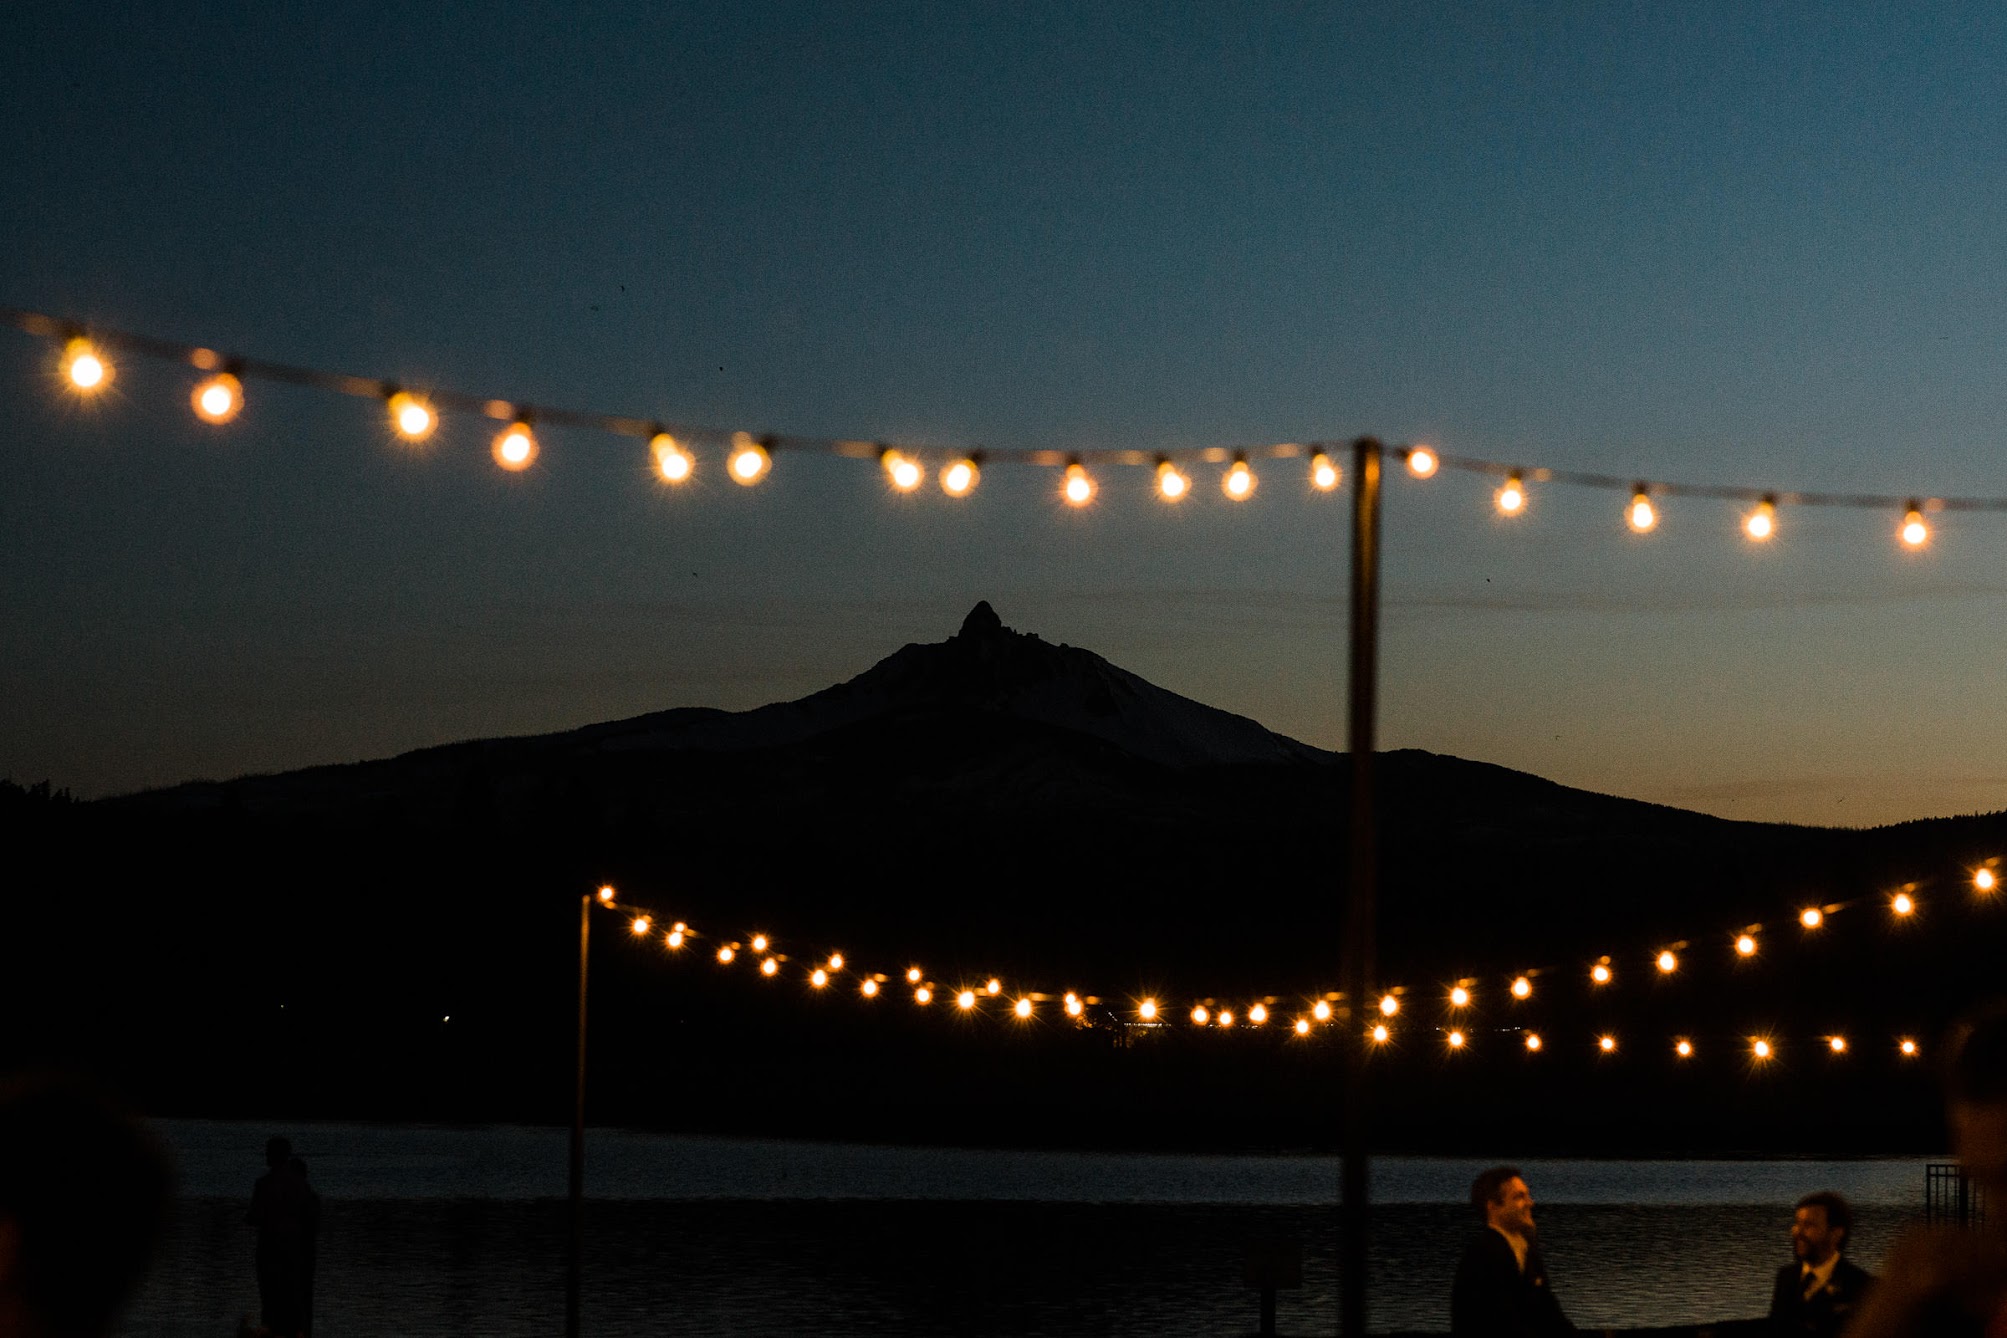 bistro lights with the outline of the mountain 